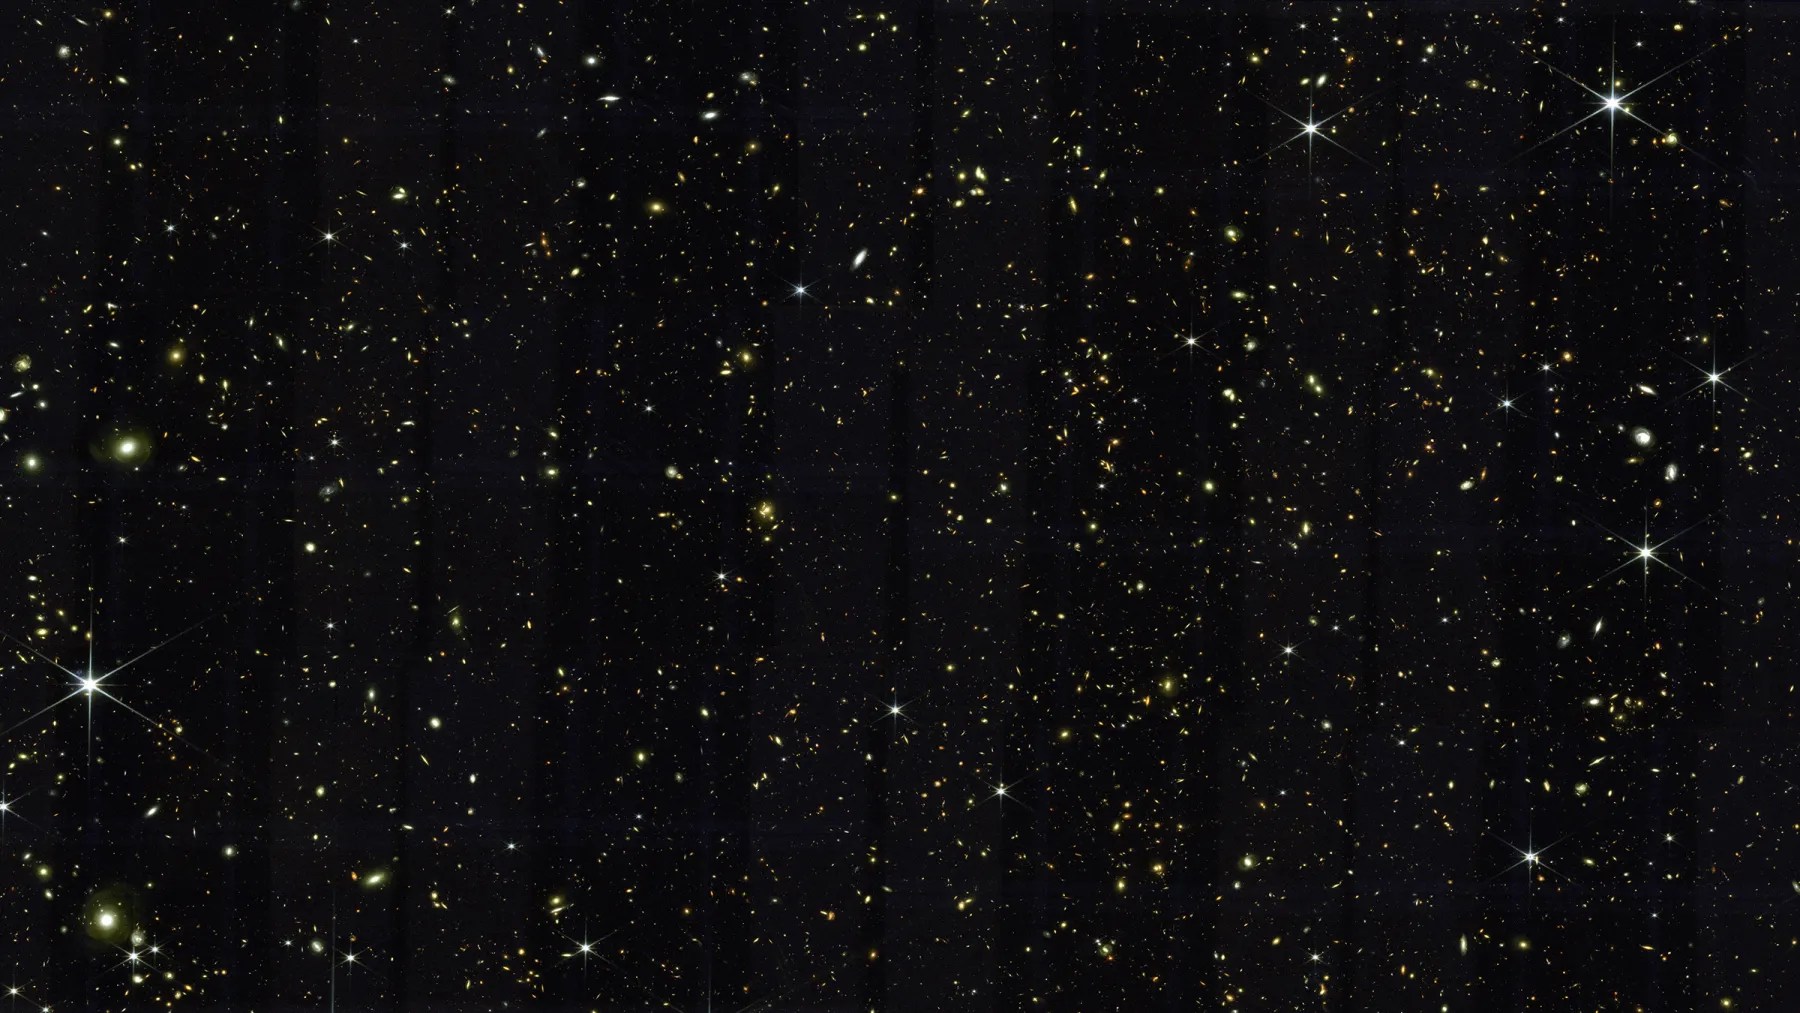  The James Webb Telescope Sees More Galaxies In One Image Than The Hubbles Deepest Look